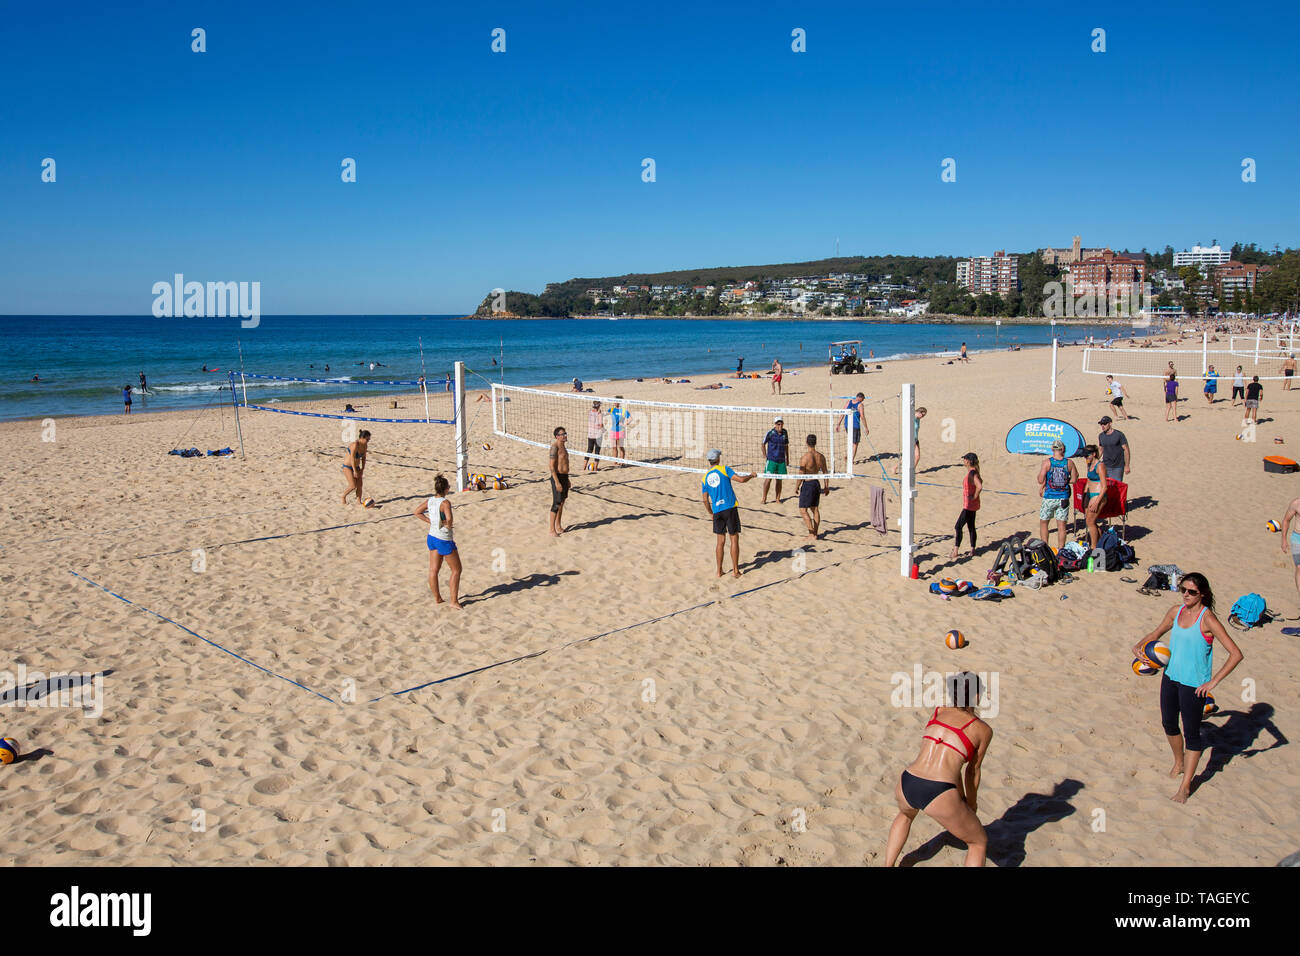 Men and women playing beach volleyball on the sands of Manly beach in Sydney,Australia, Manly beach has multiple volleyball courts on the sand Stock Photo